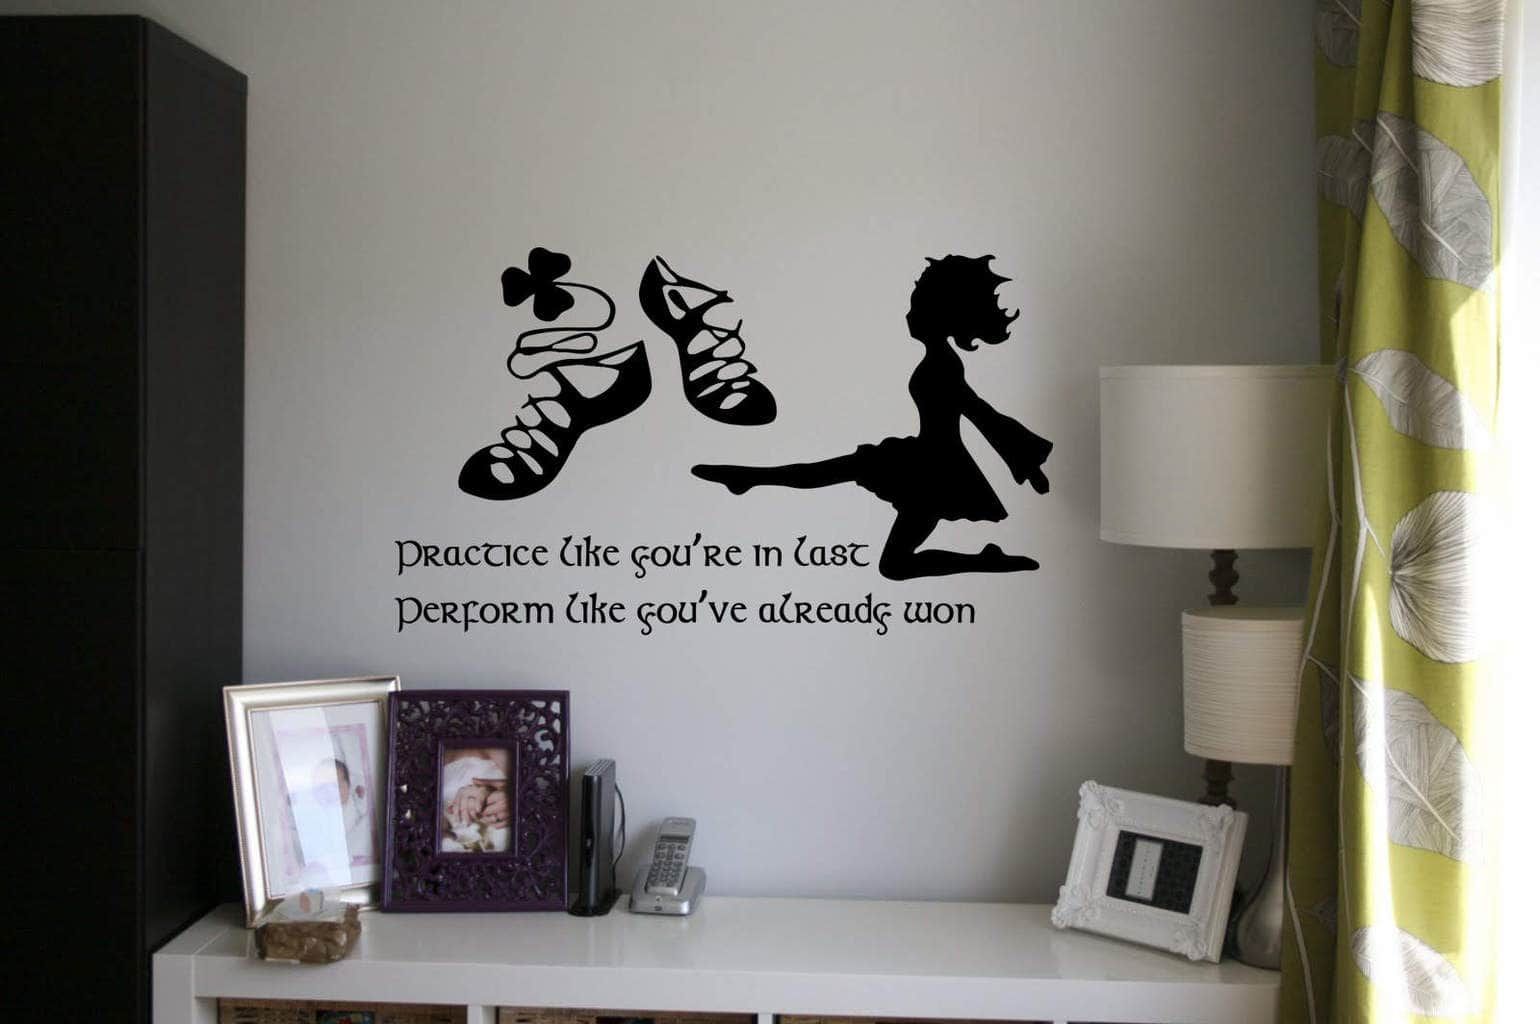 Irish Dance Practice Wall Decal | Wall Decal | Wall Art Decal With Regard To Dancing Wall Art (View 15 of 15)